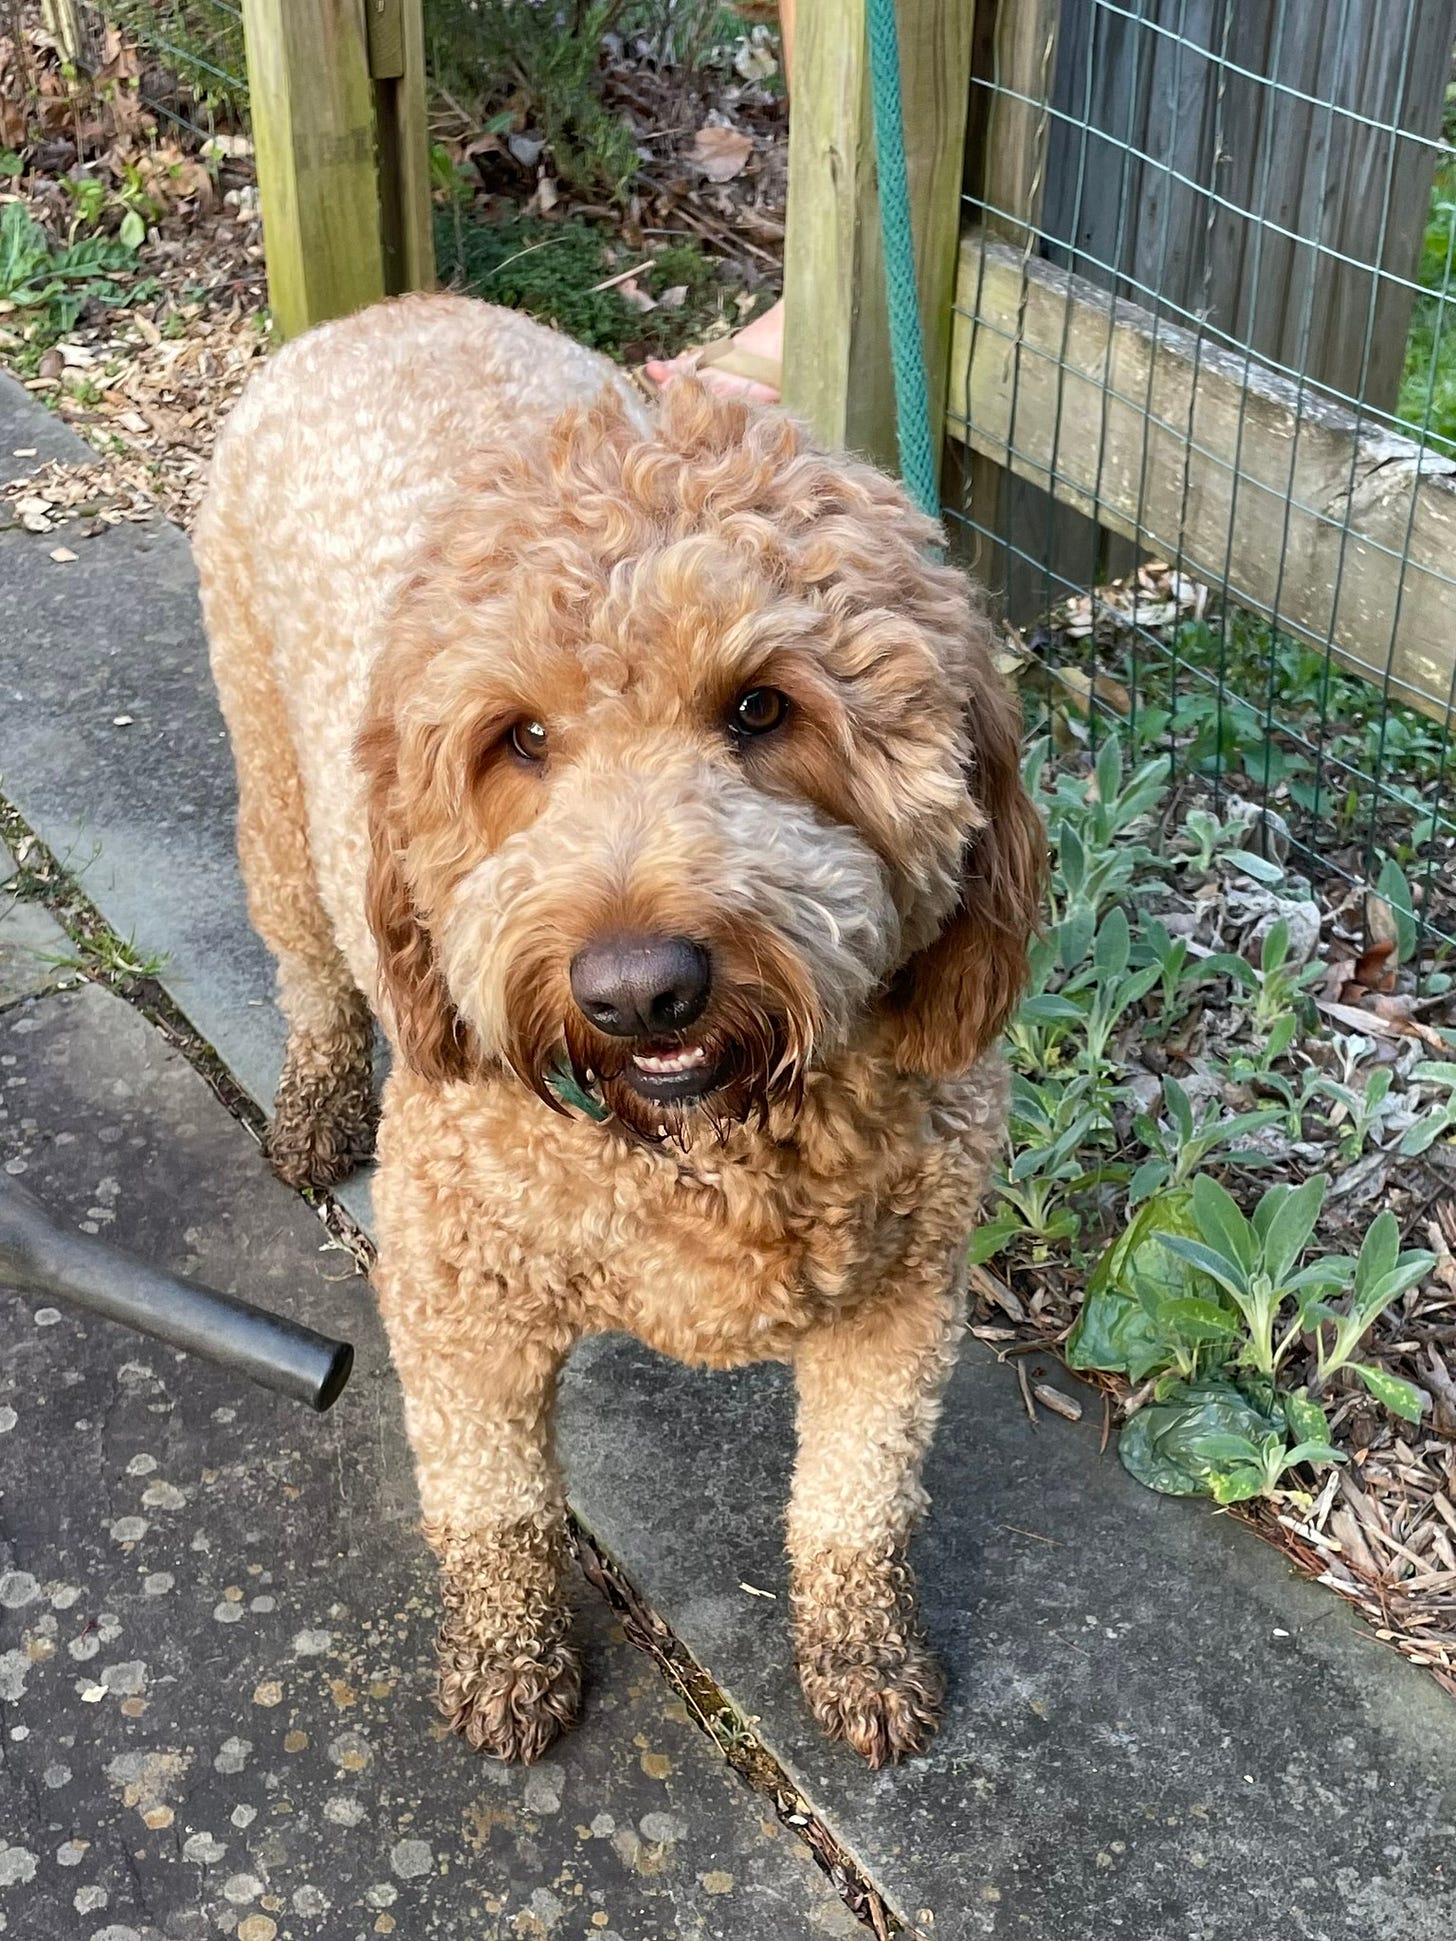 A chunky goldendoodle with filthy paws waits tethered to the fence to get his feet sprayed by the hose.